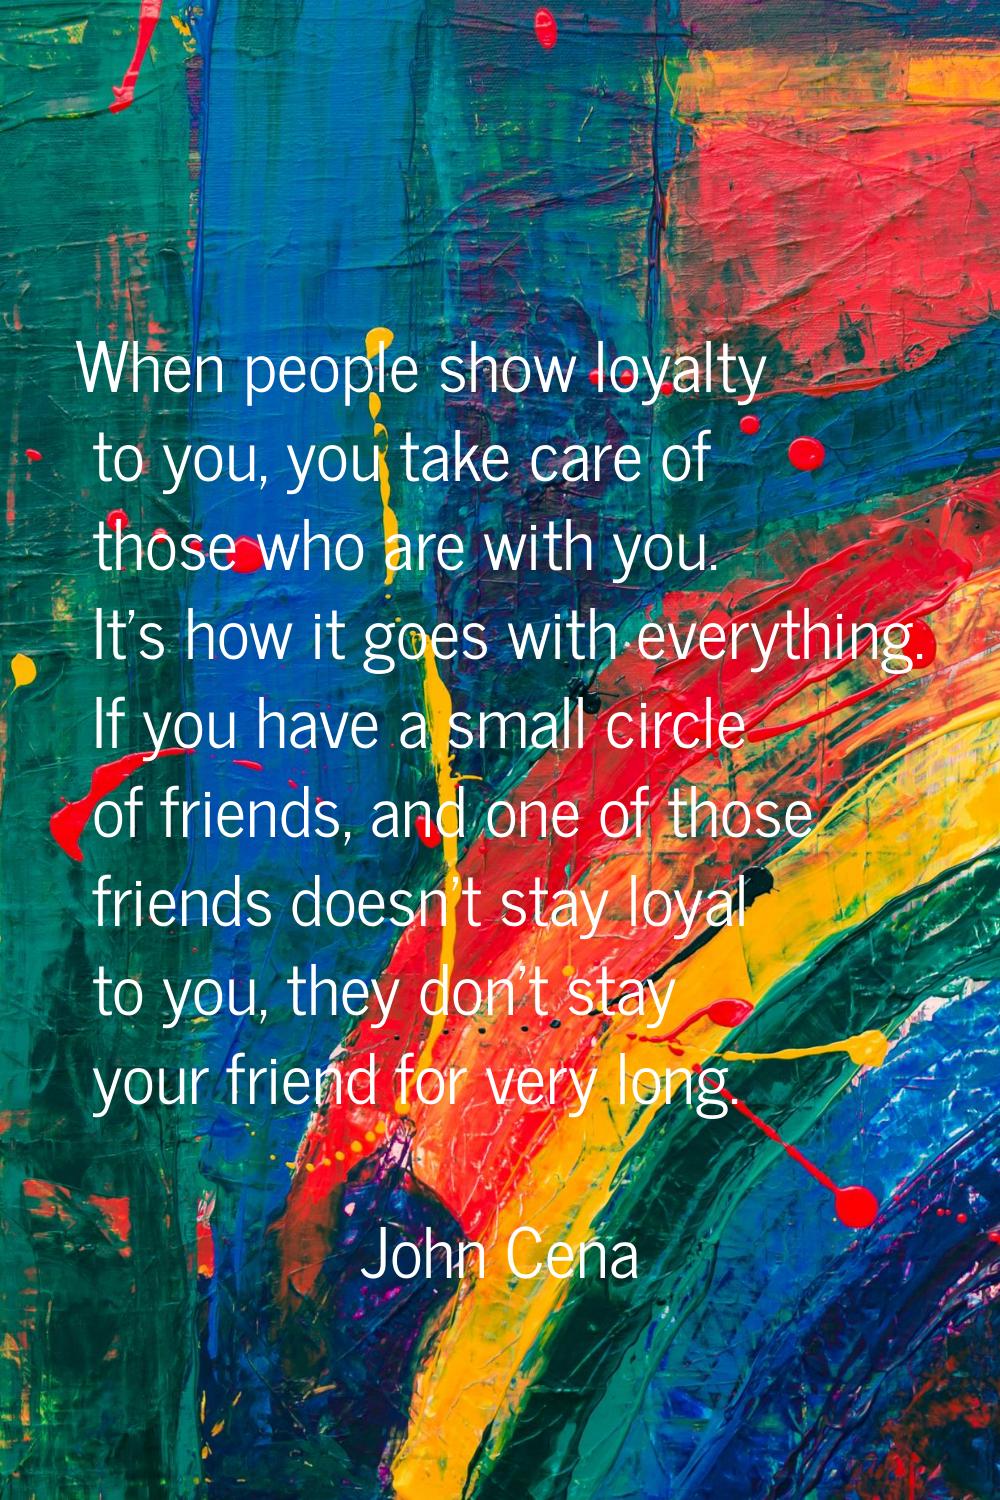 When people show loyalty to you, you take care of those who are with you. It's how it goes with eve